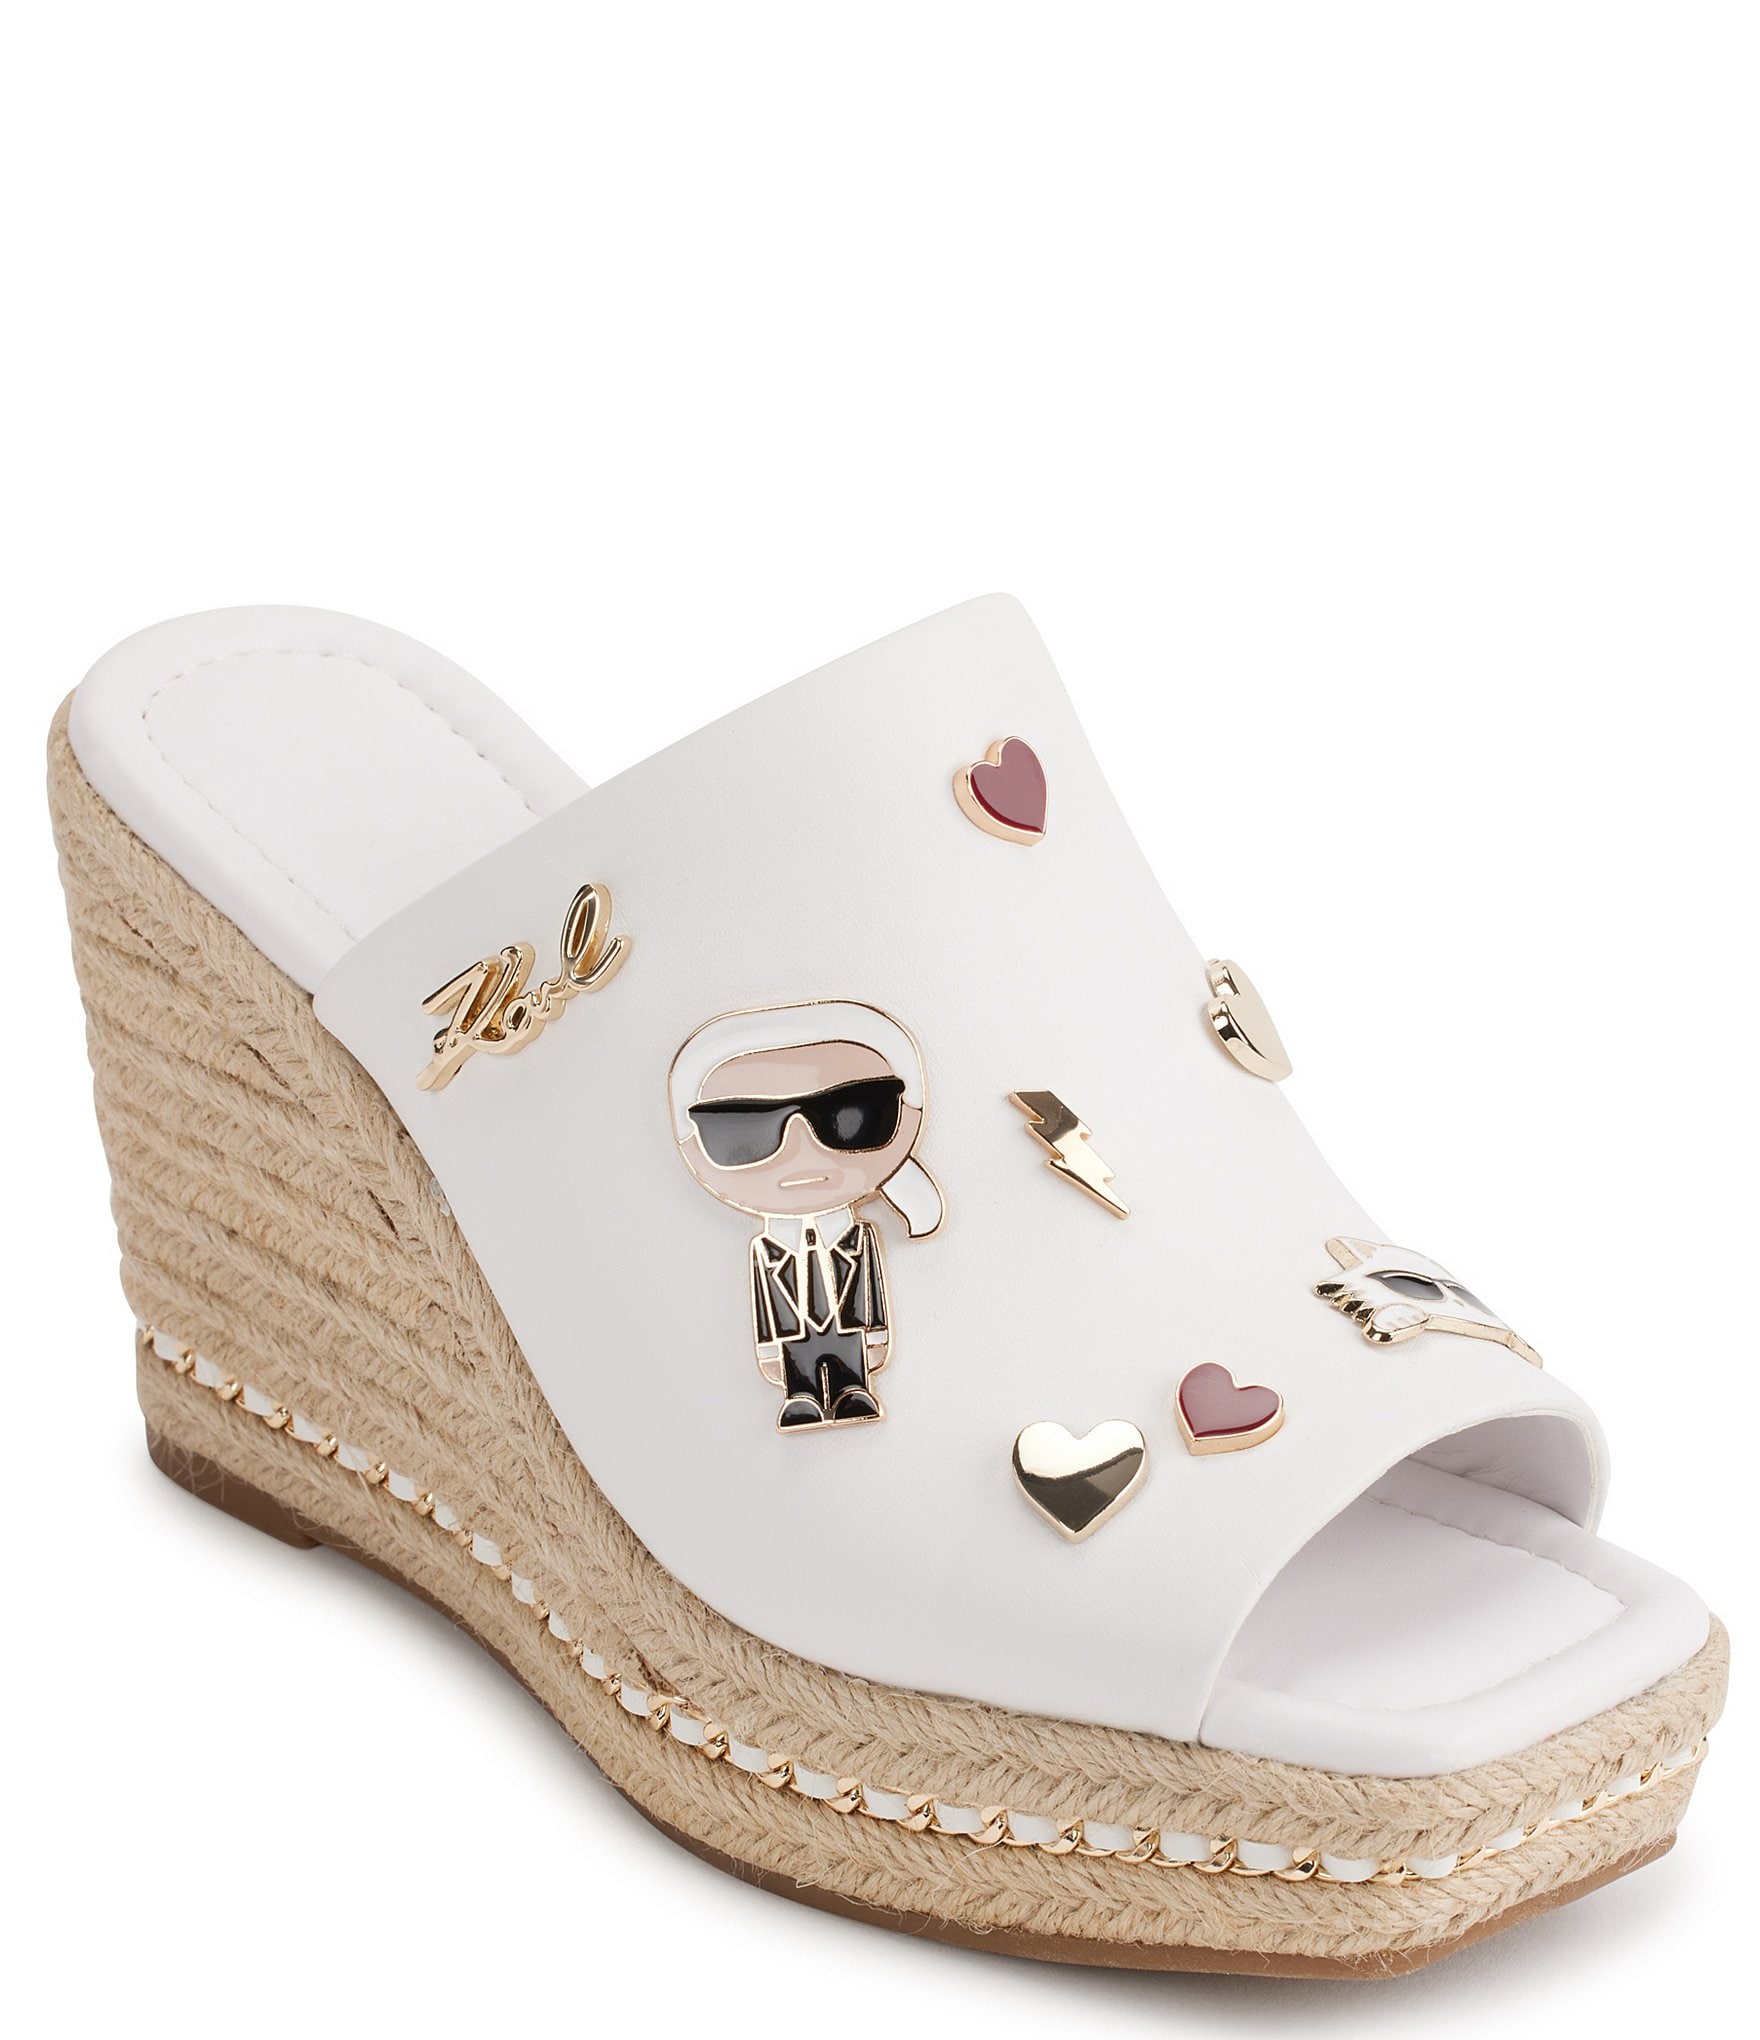 Pin on Wedges